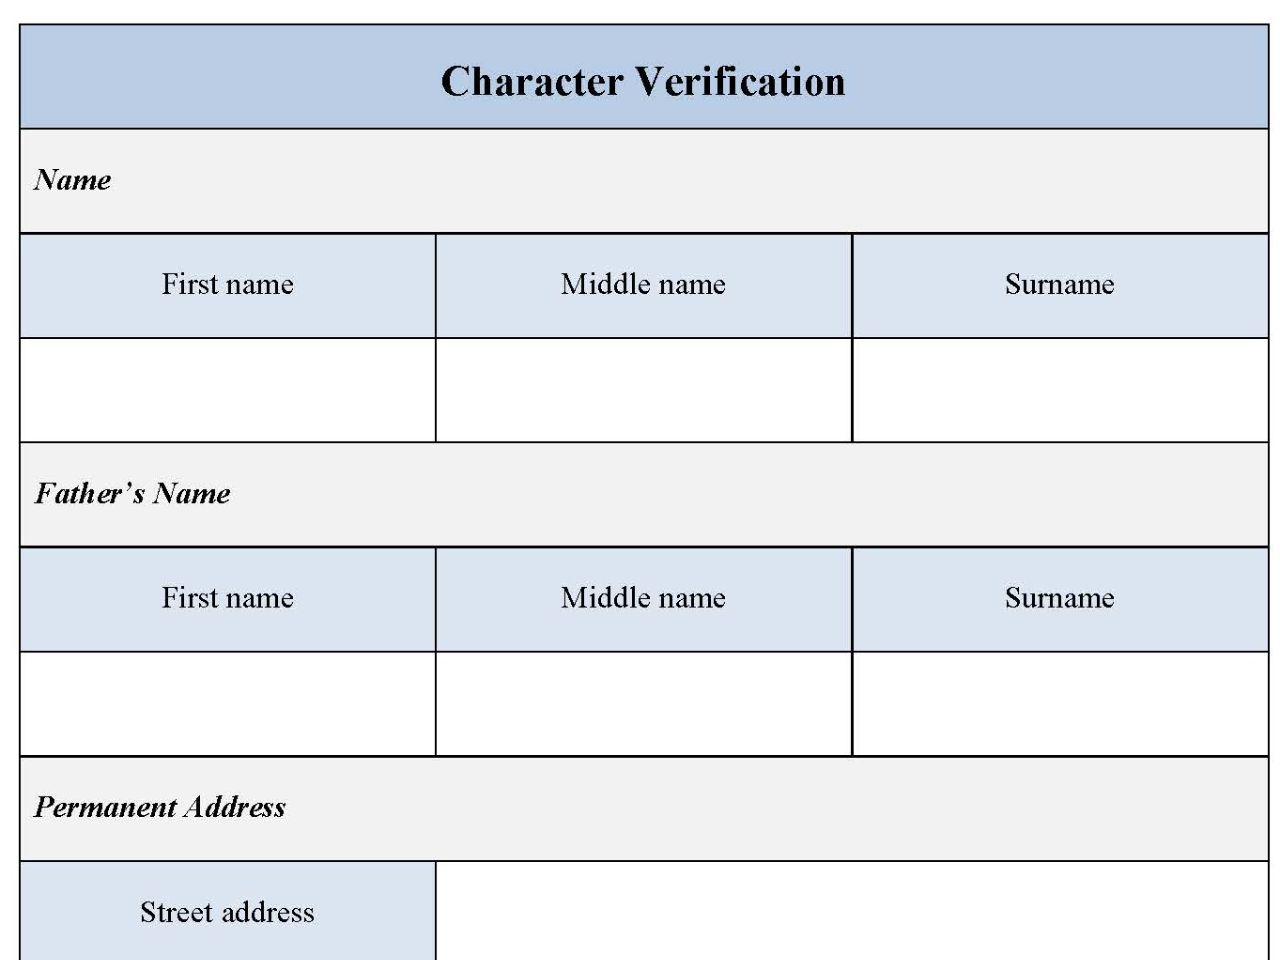 Character Verification Form